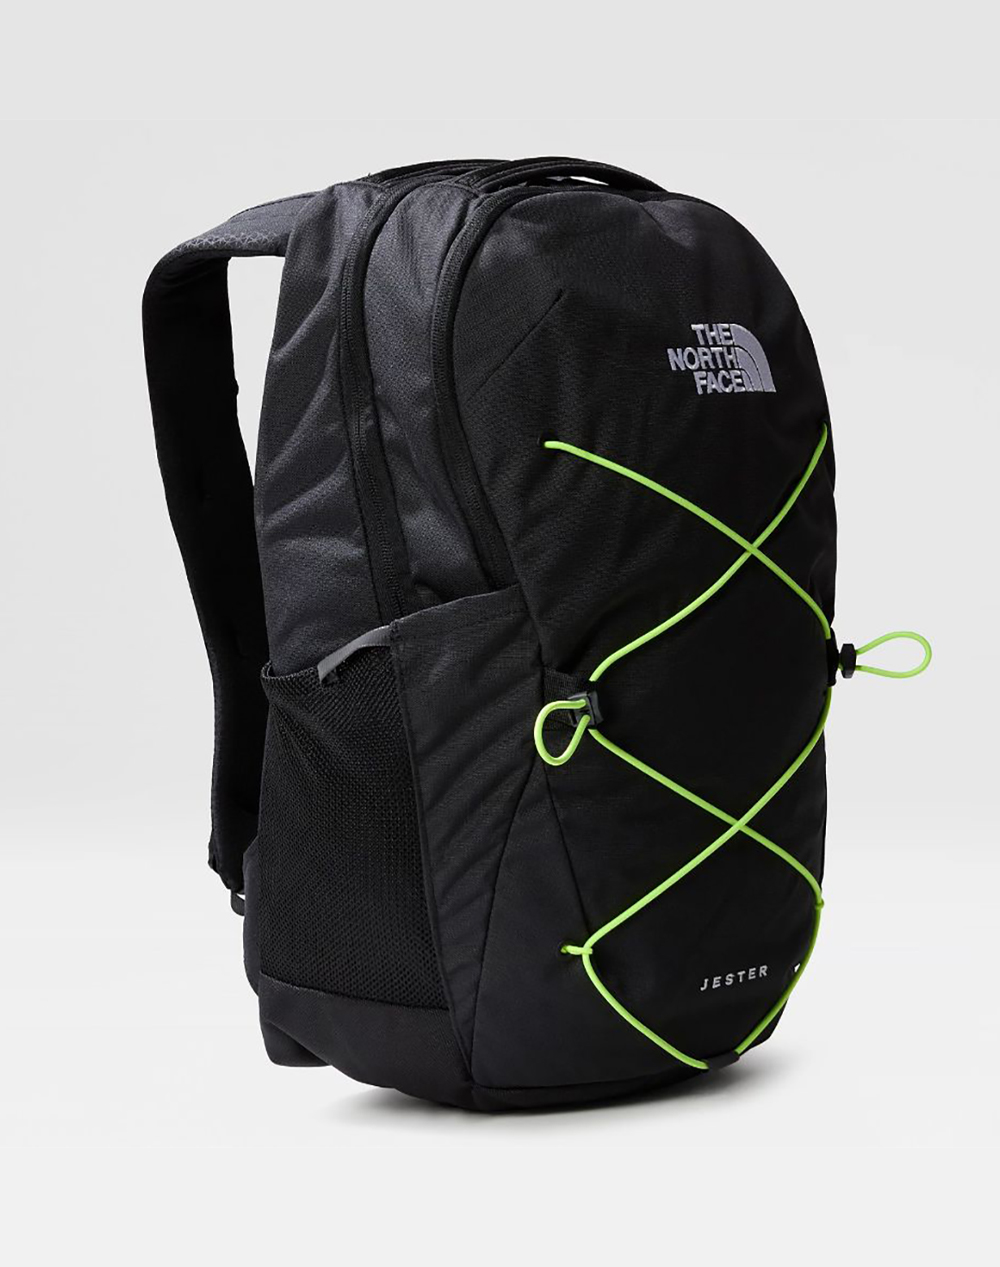 THE NORTH FACE JESTER BACKPACK (Διαστάσεις: 28 x 21 x 46 εκ) NF0A3VXF-NFIC4 JetBlack